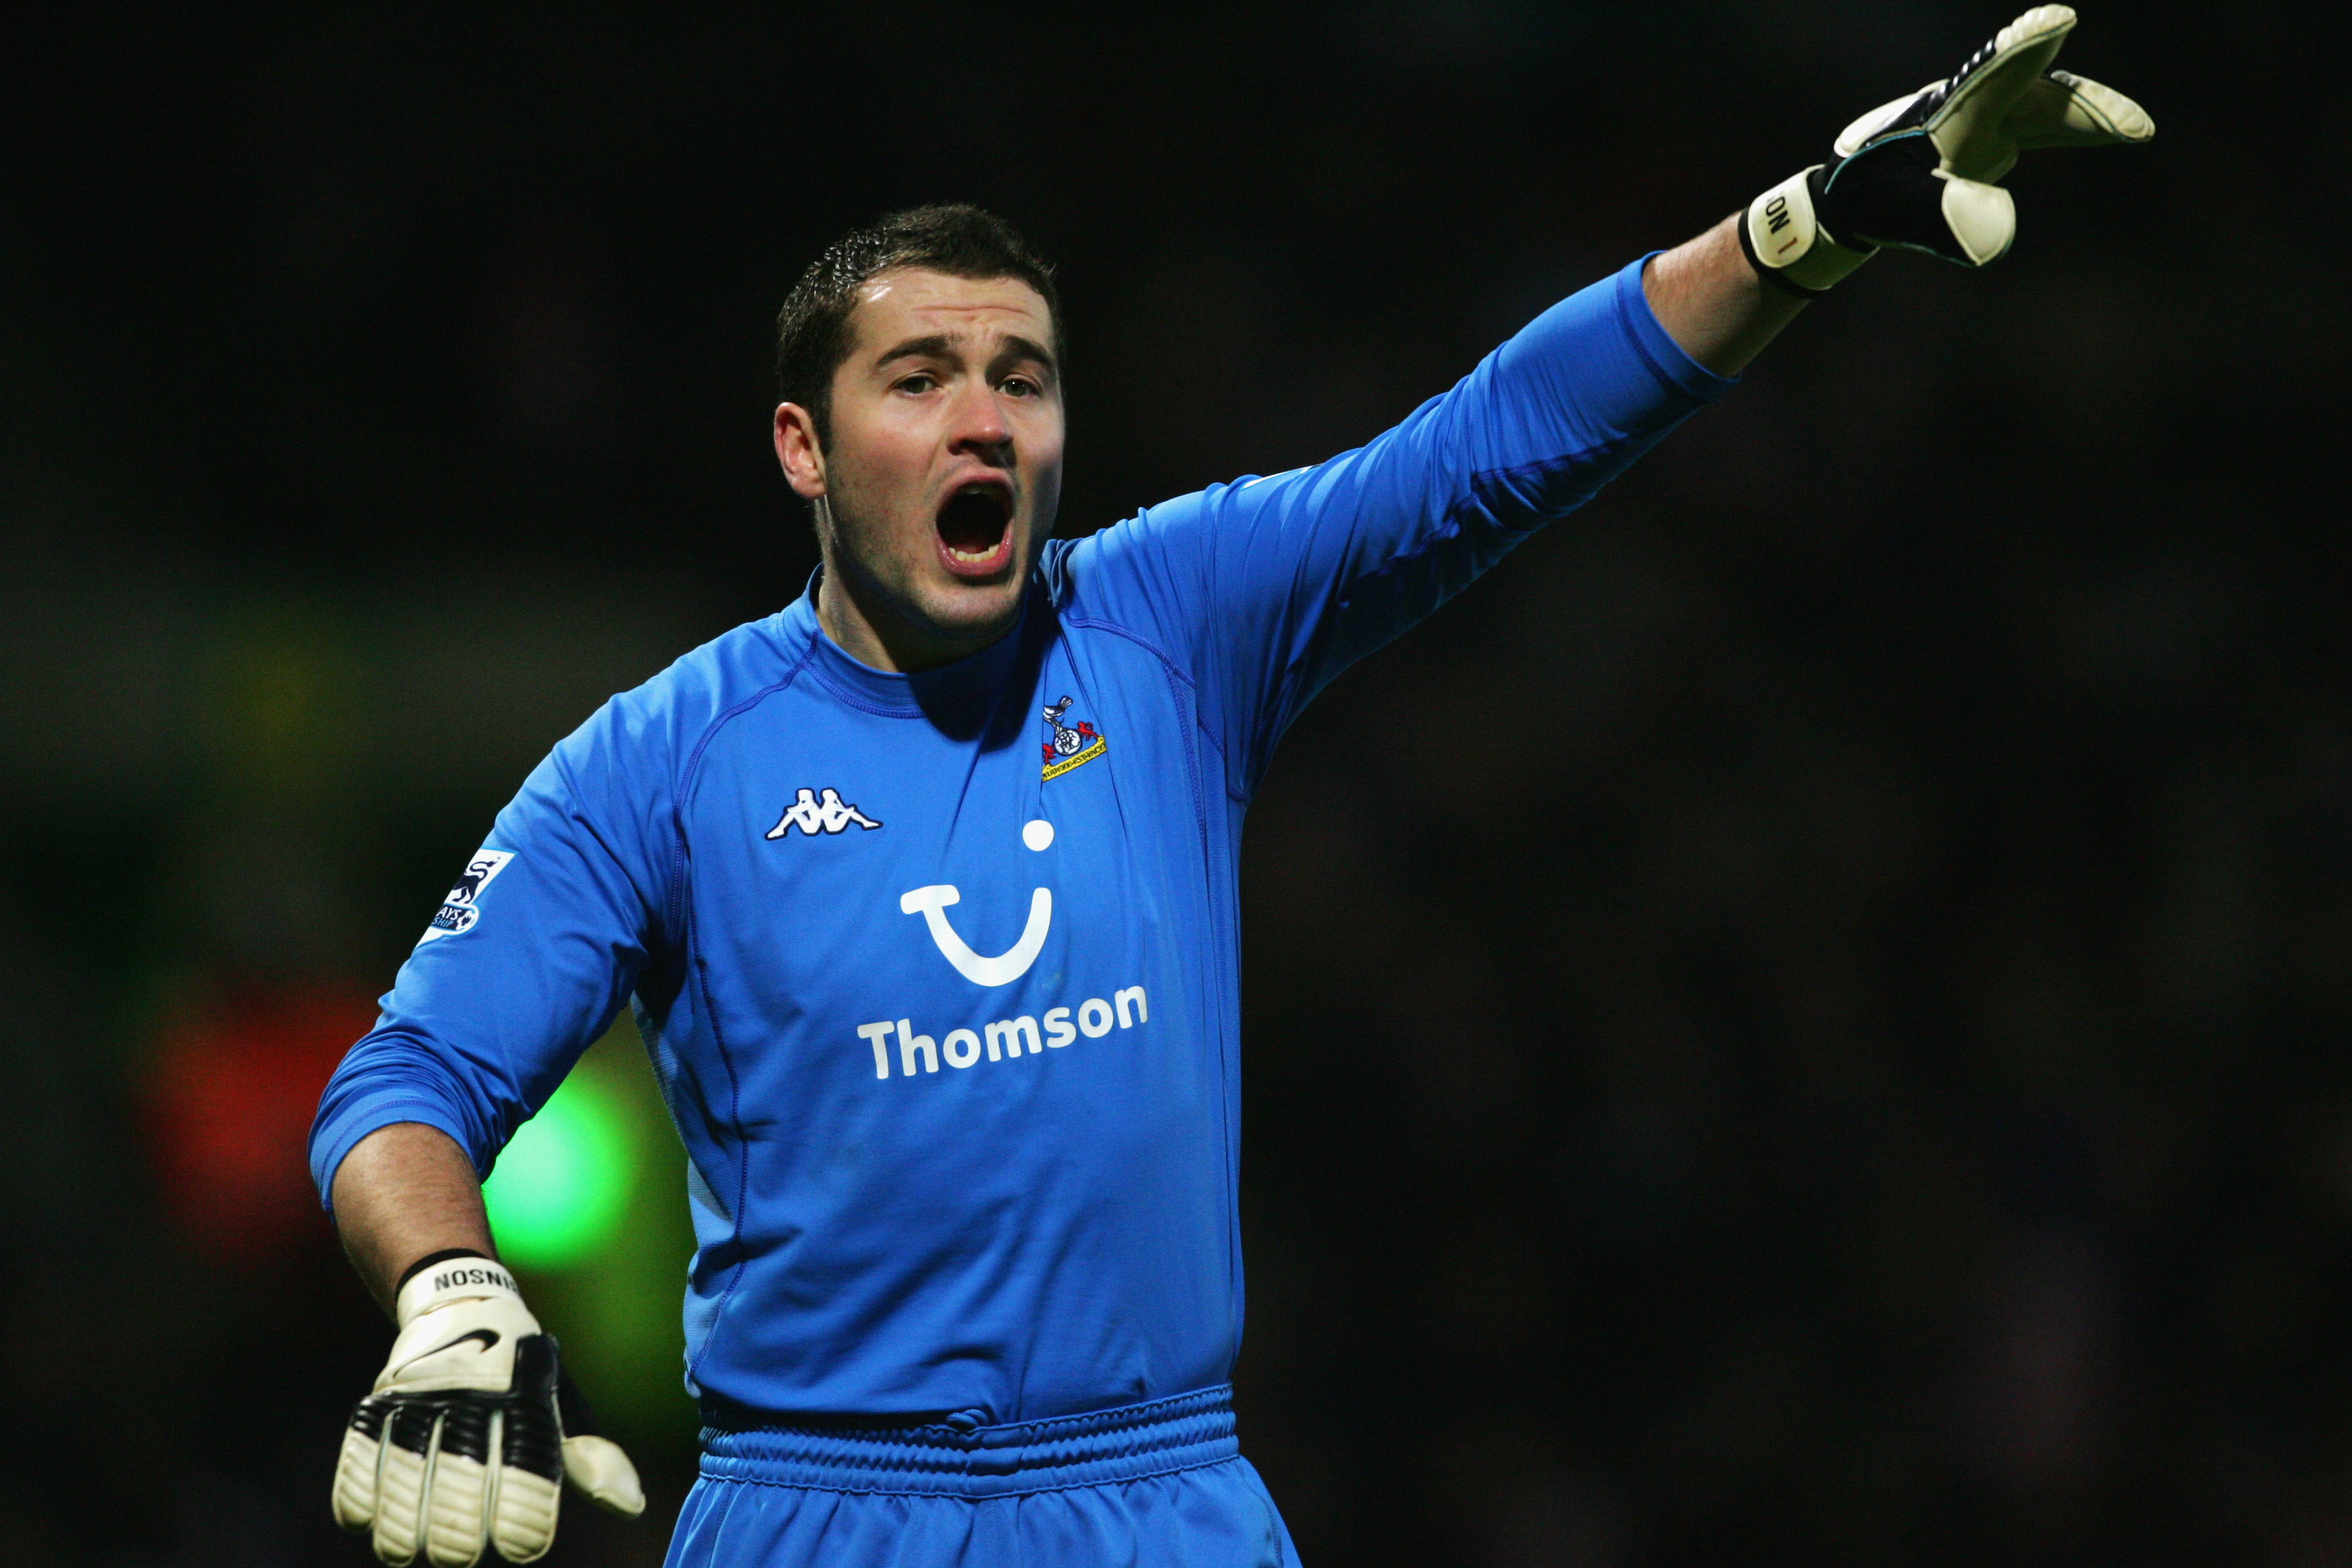 A photo of former goalkeeper Paul Robinson during his time with Tottenham Hotspur. Photo: Getty Images